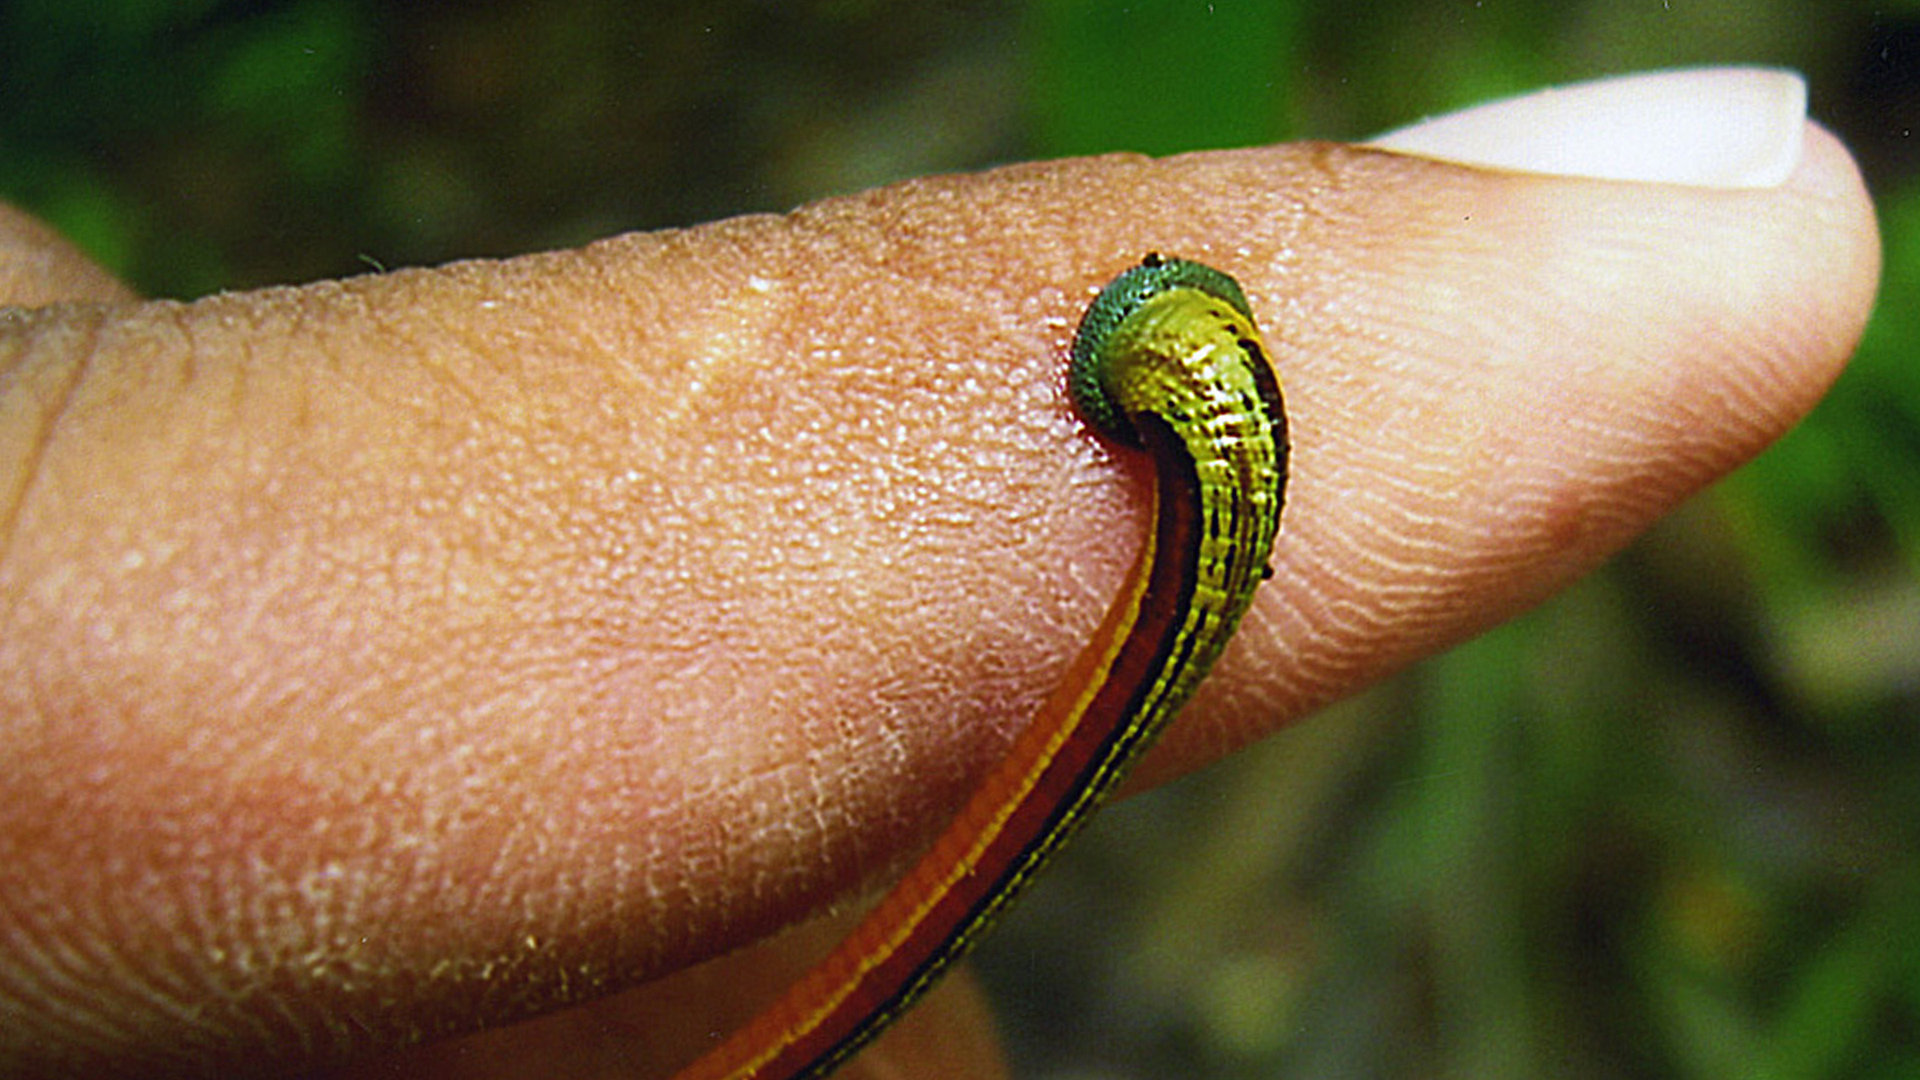 Disgustingly Healthy: The Leech Remedy